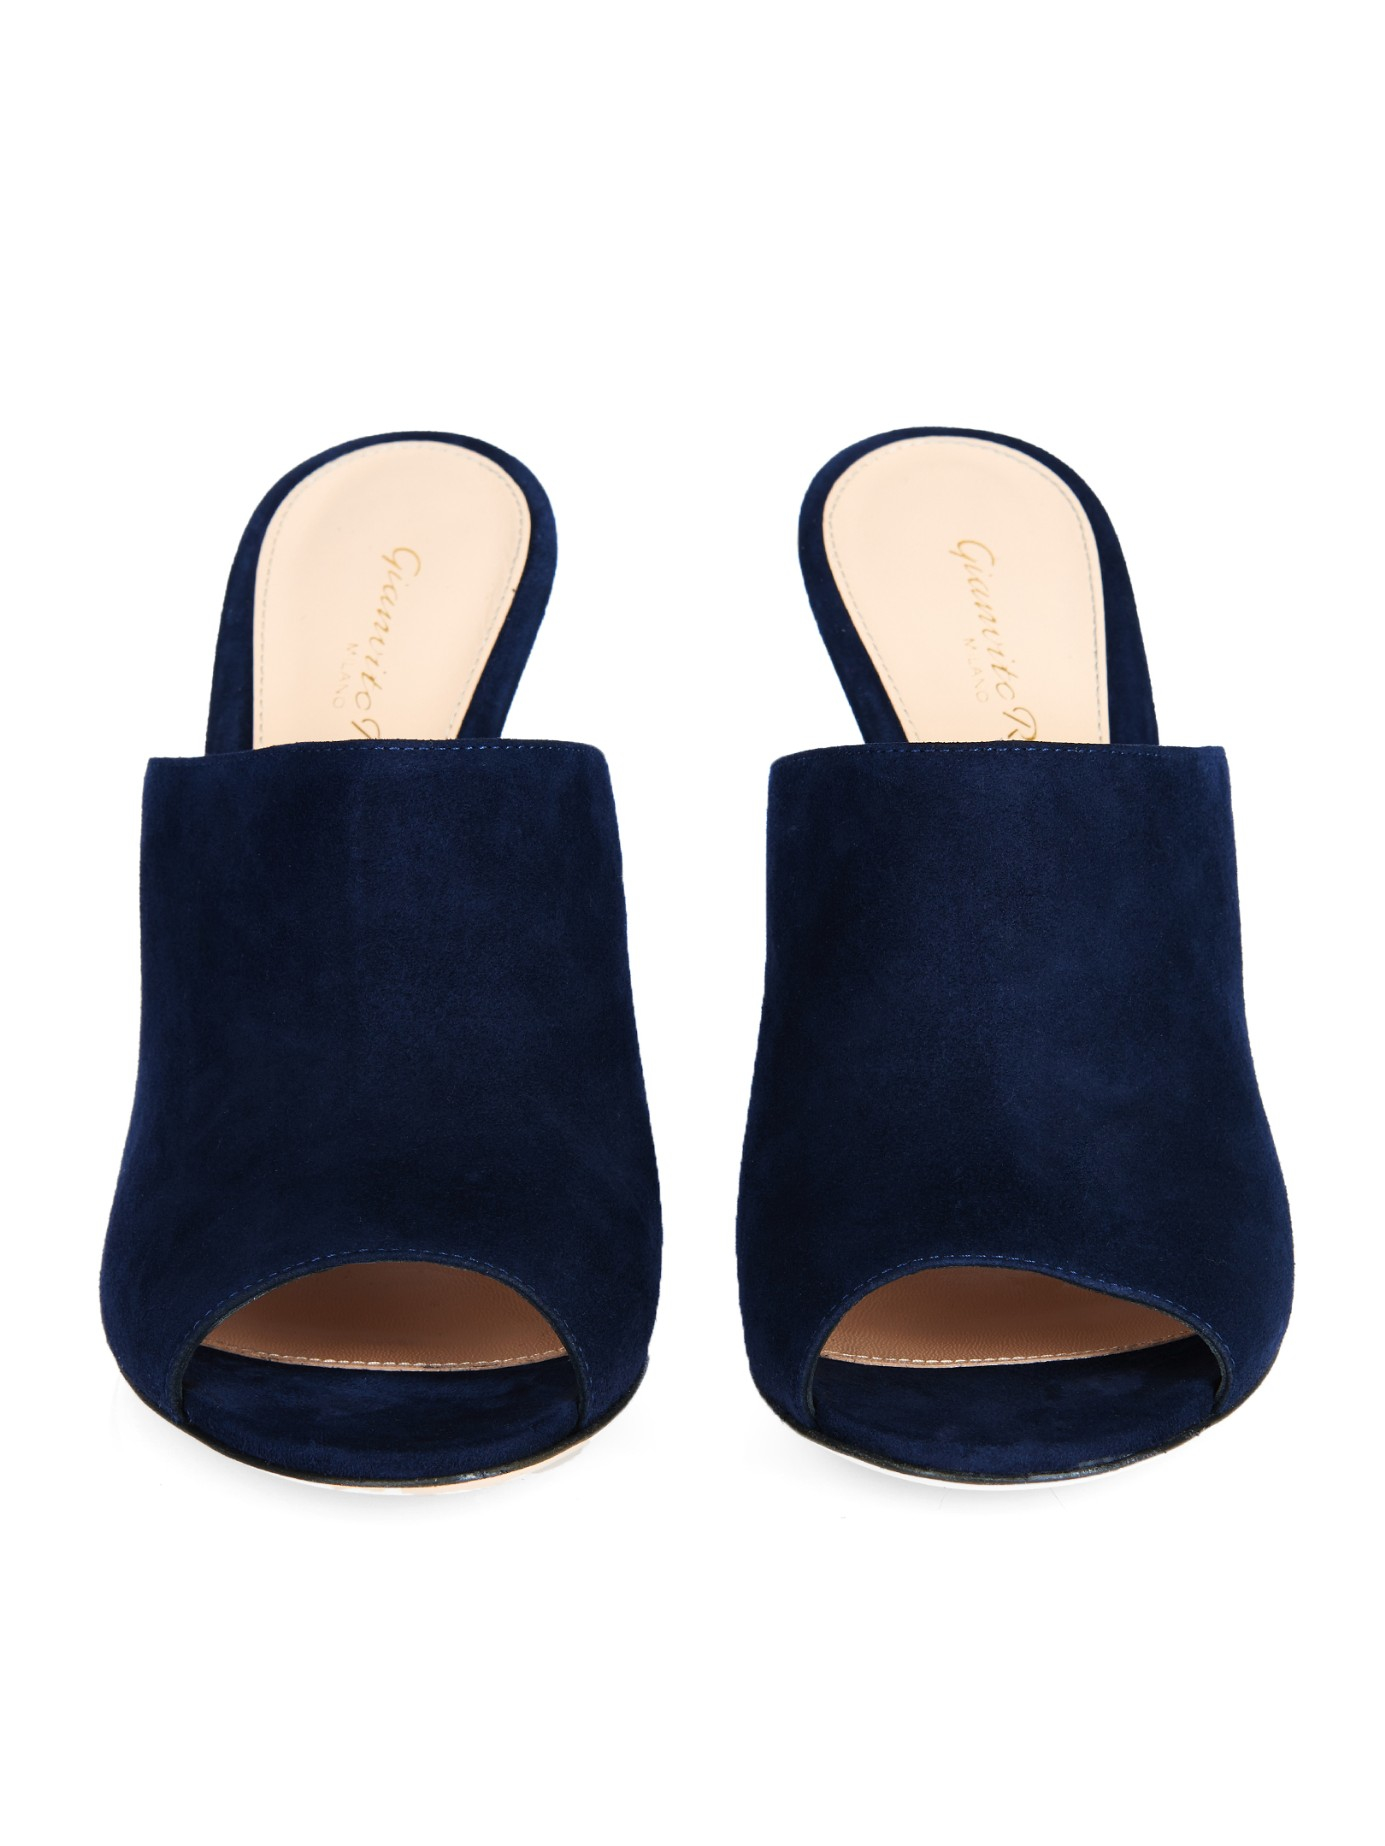 Gianvito Rossi Open-Toe Suede Mules in Navy (Blue) | Lyst